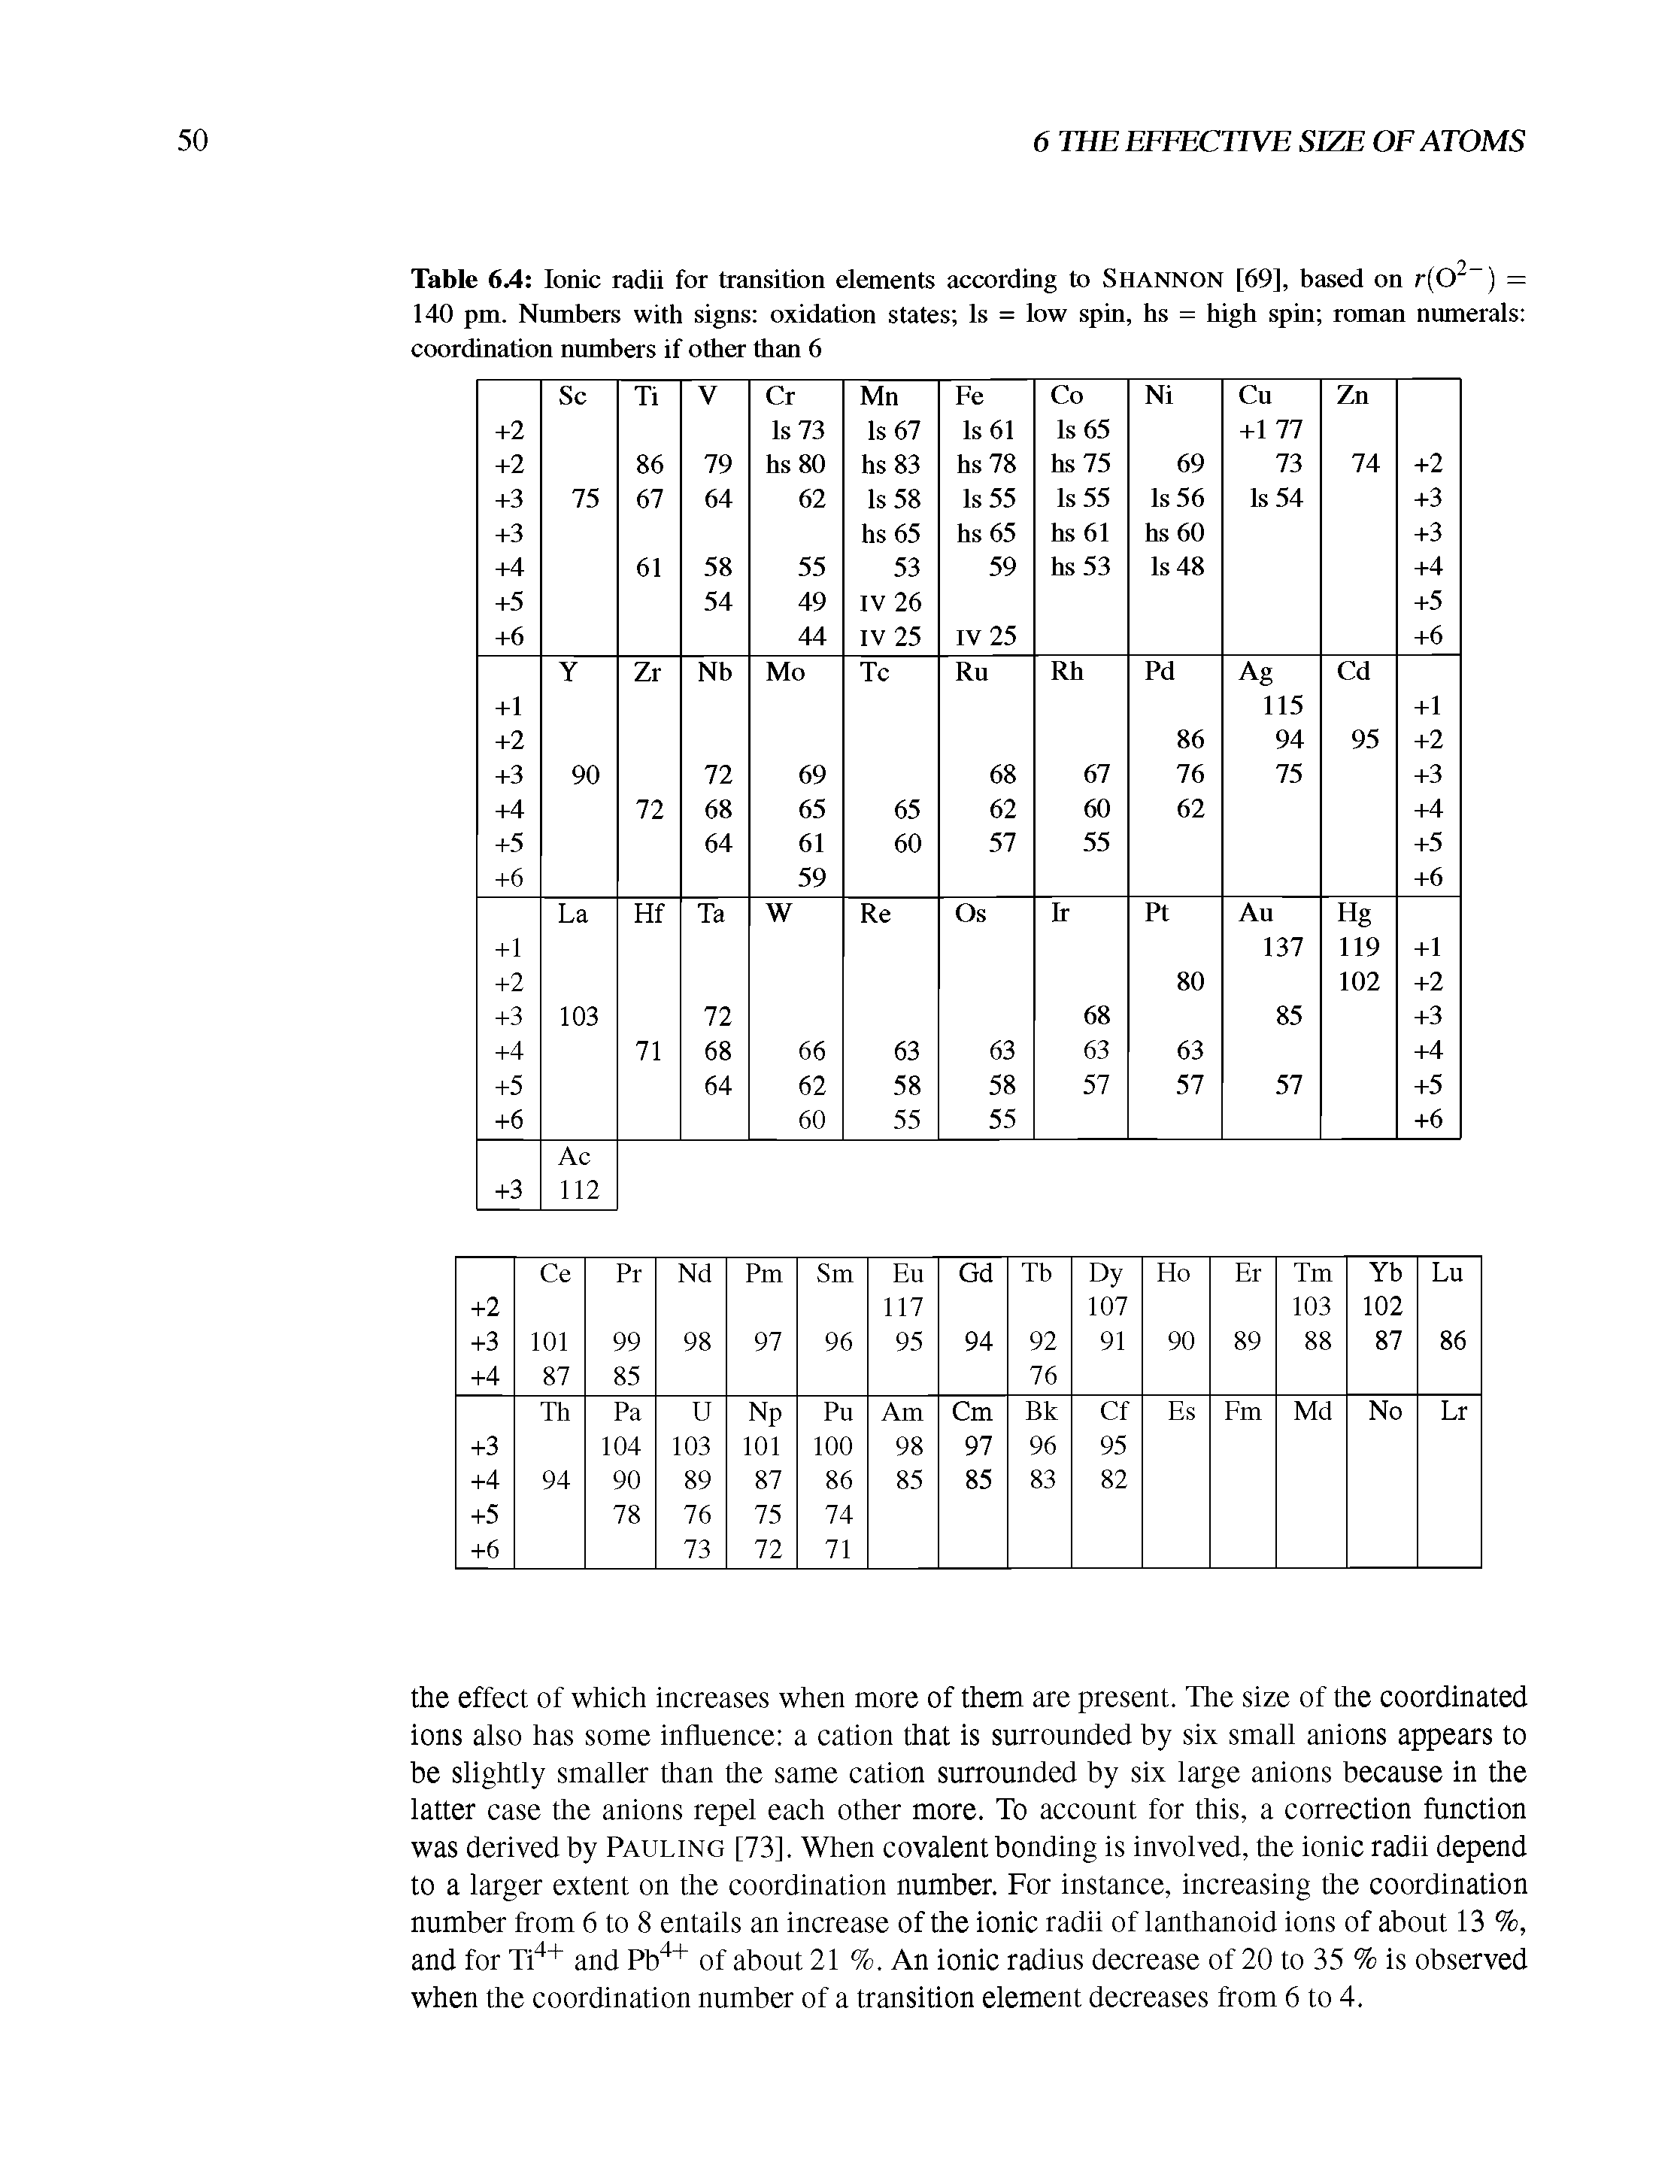 Table 6.4 Ionic radii for transition elements according to SHANNON [69], based on r(02 ) = 140 pm. Numbers with signs oxidation states Is = low spin, hs = high spin roman numerals coordination numbers if other than 6...